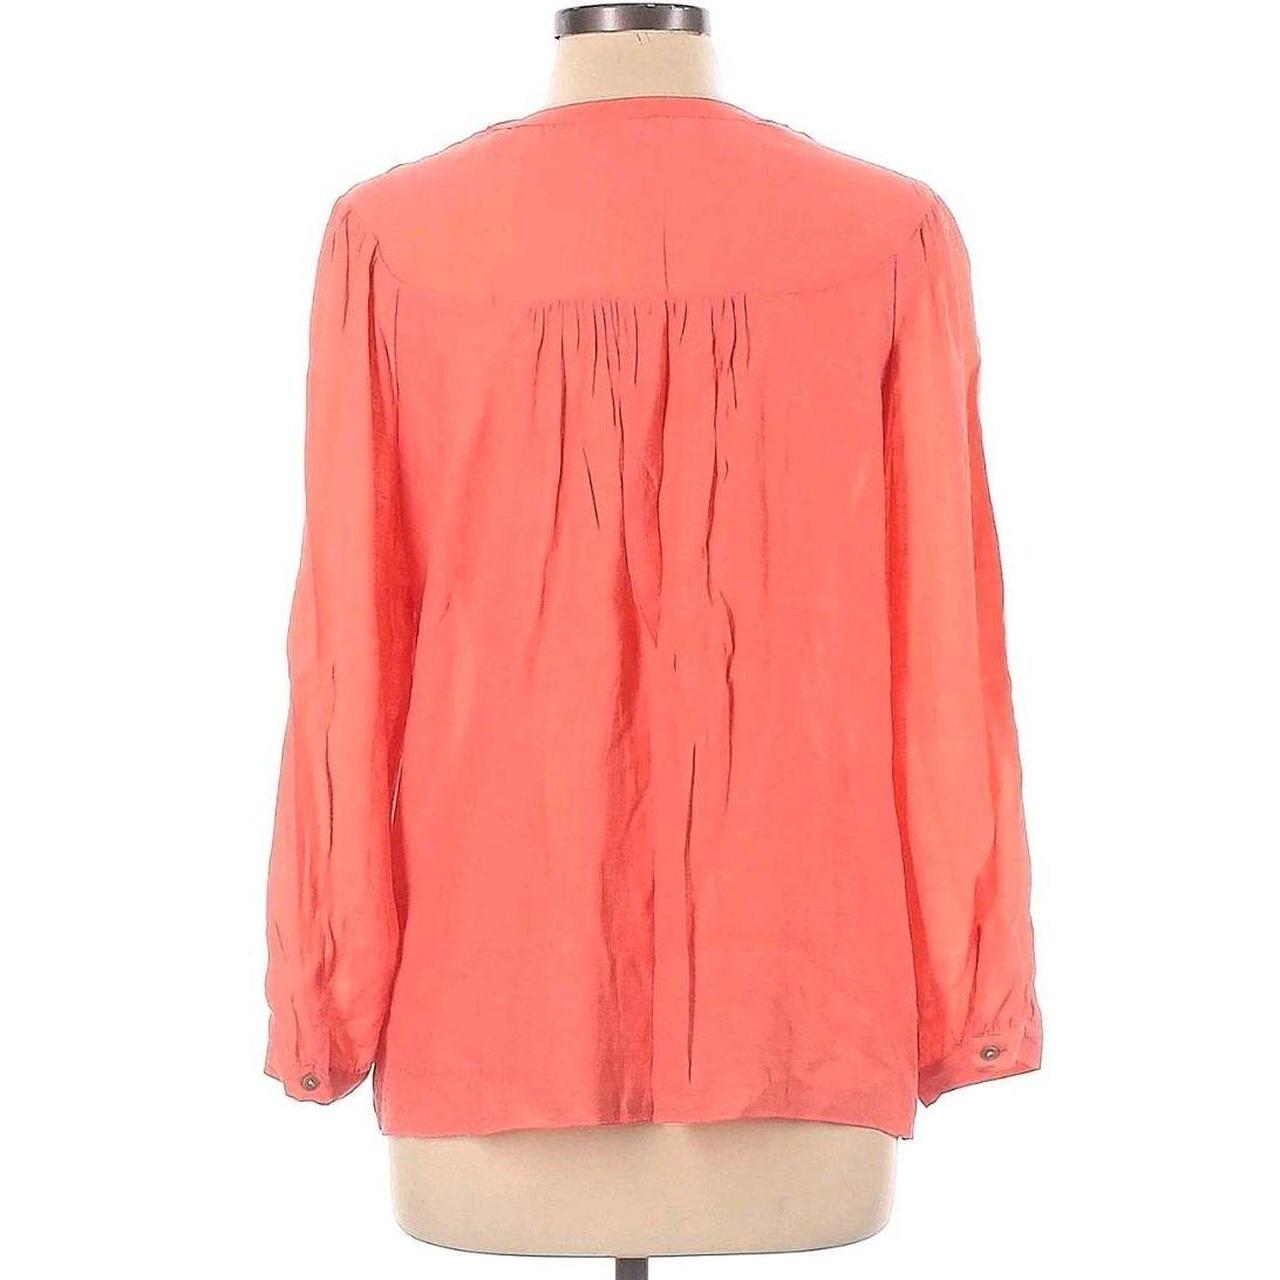 Annette Women's Orange and Pink T-shirt (2)